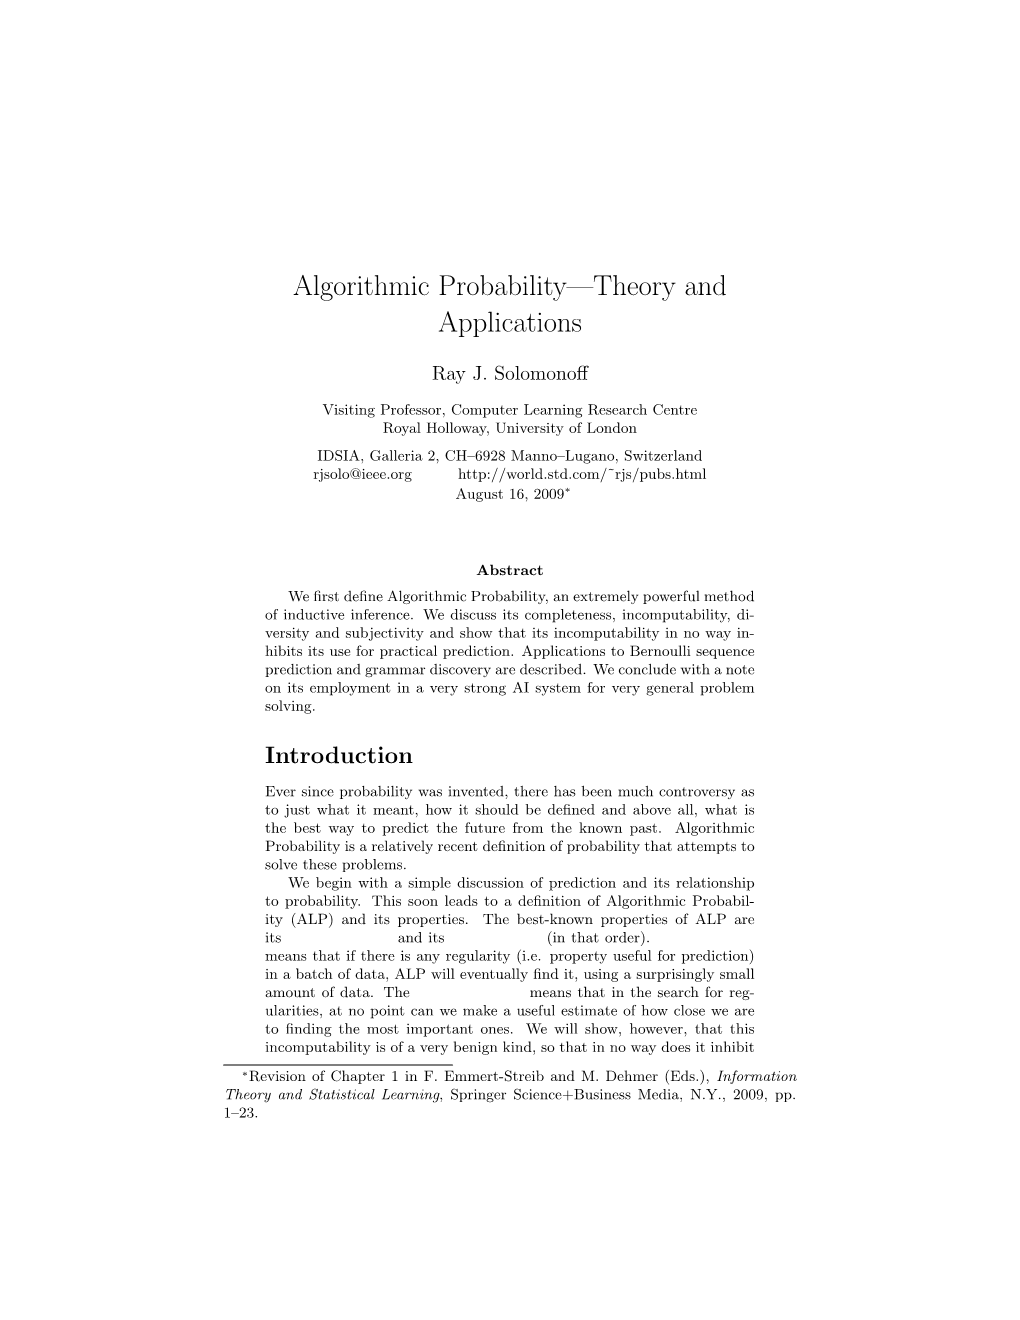 Algorithmic Probability—Theory and Applications